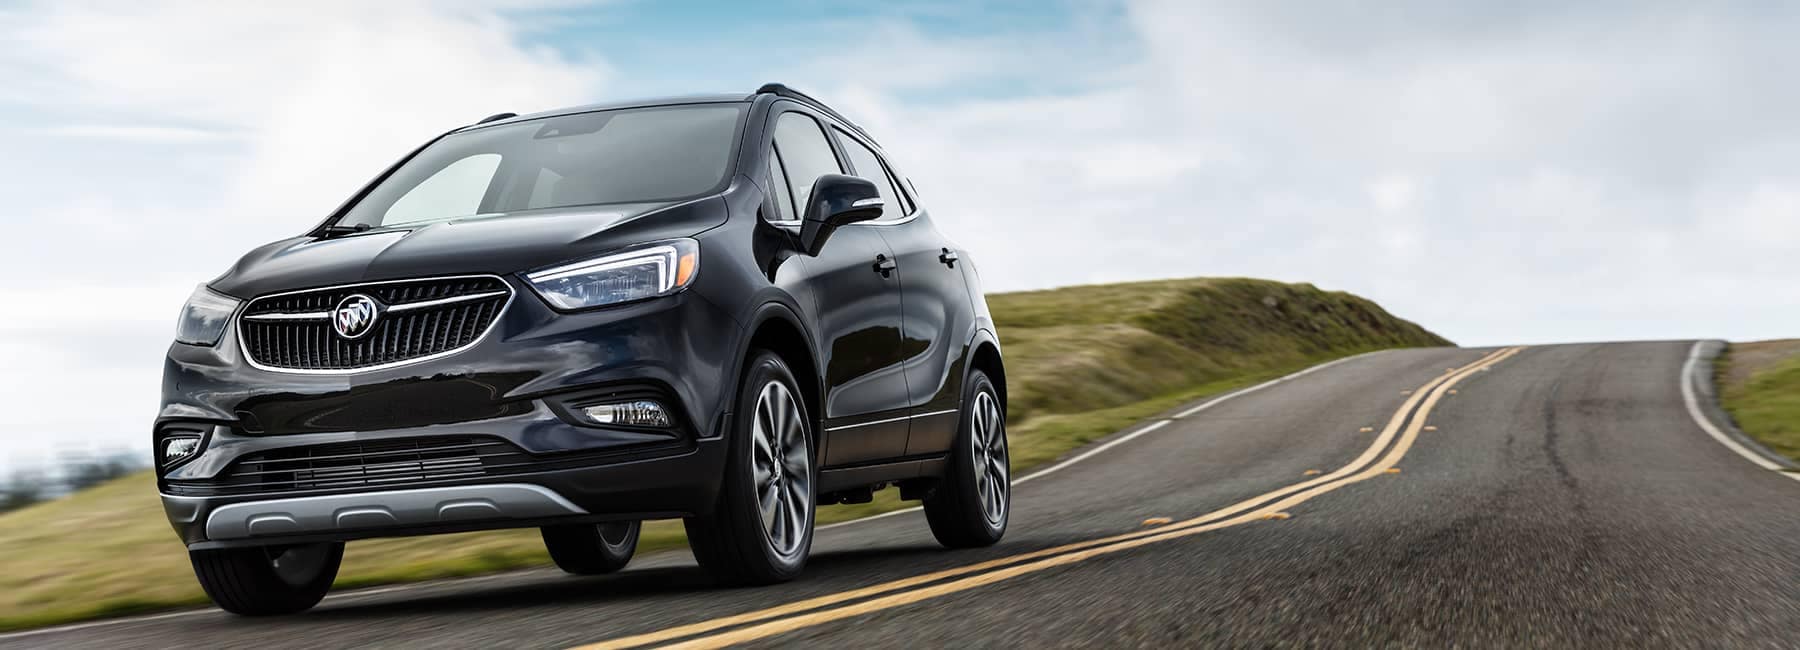 Black 2020 Buick Encore on a road_mobile